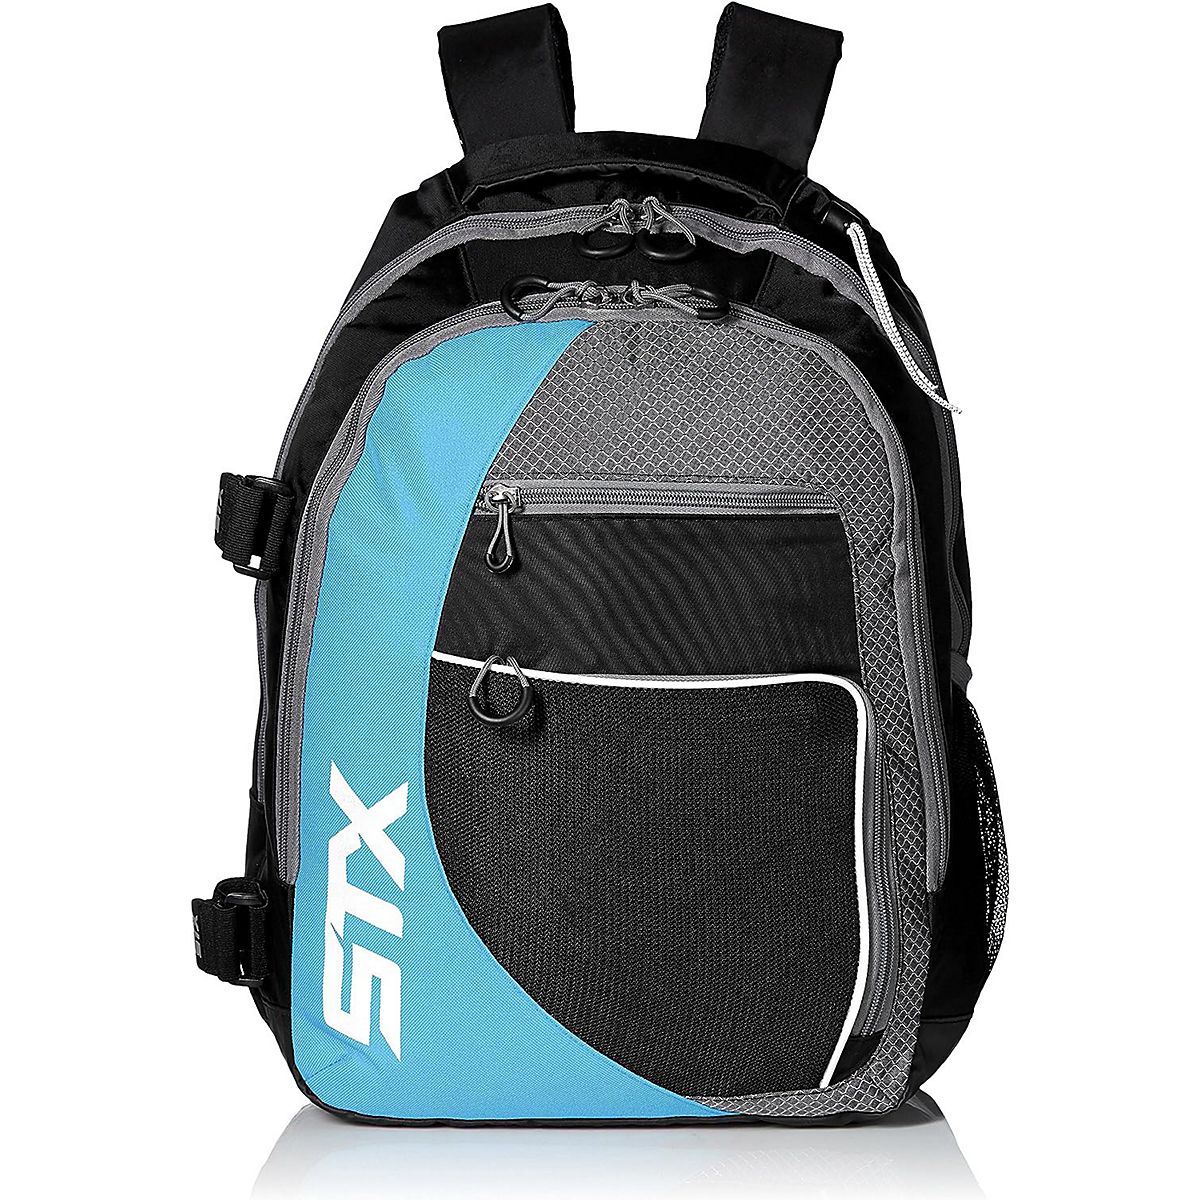 STX Sidewinder Backpack | Free Shipping at Academy